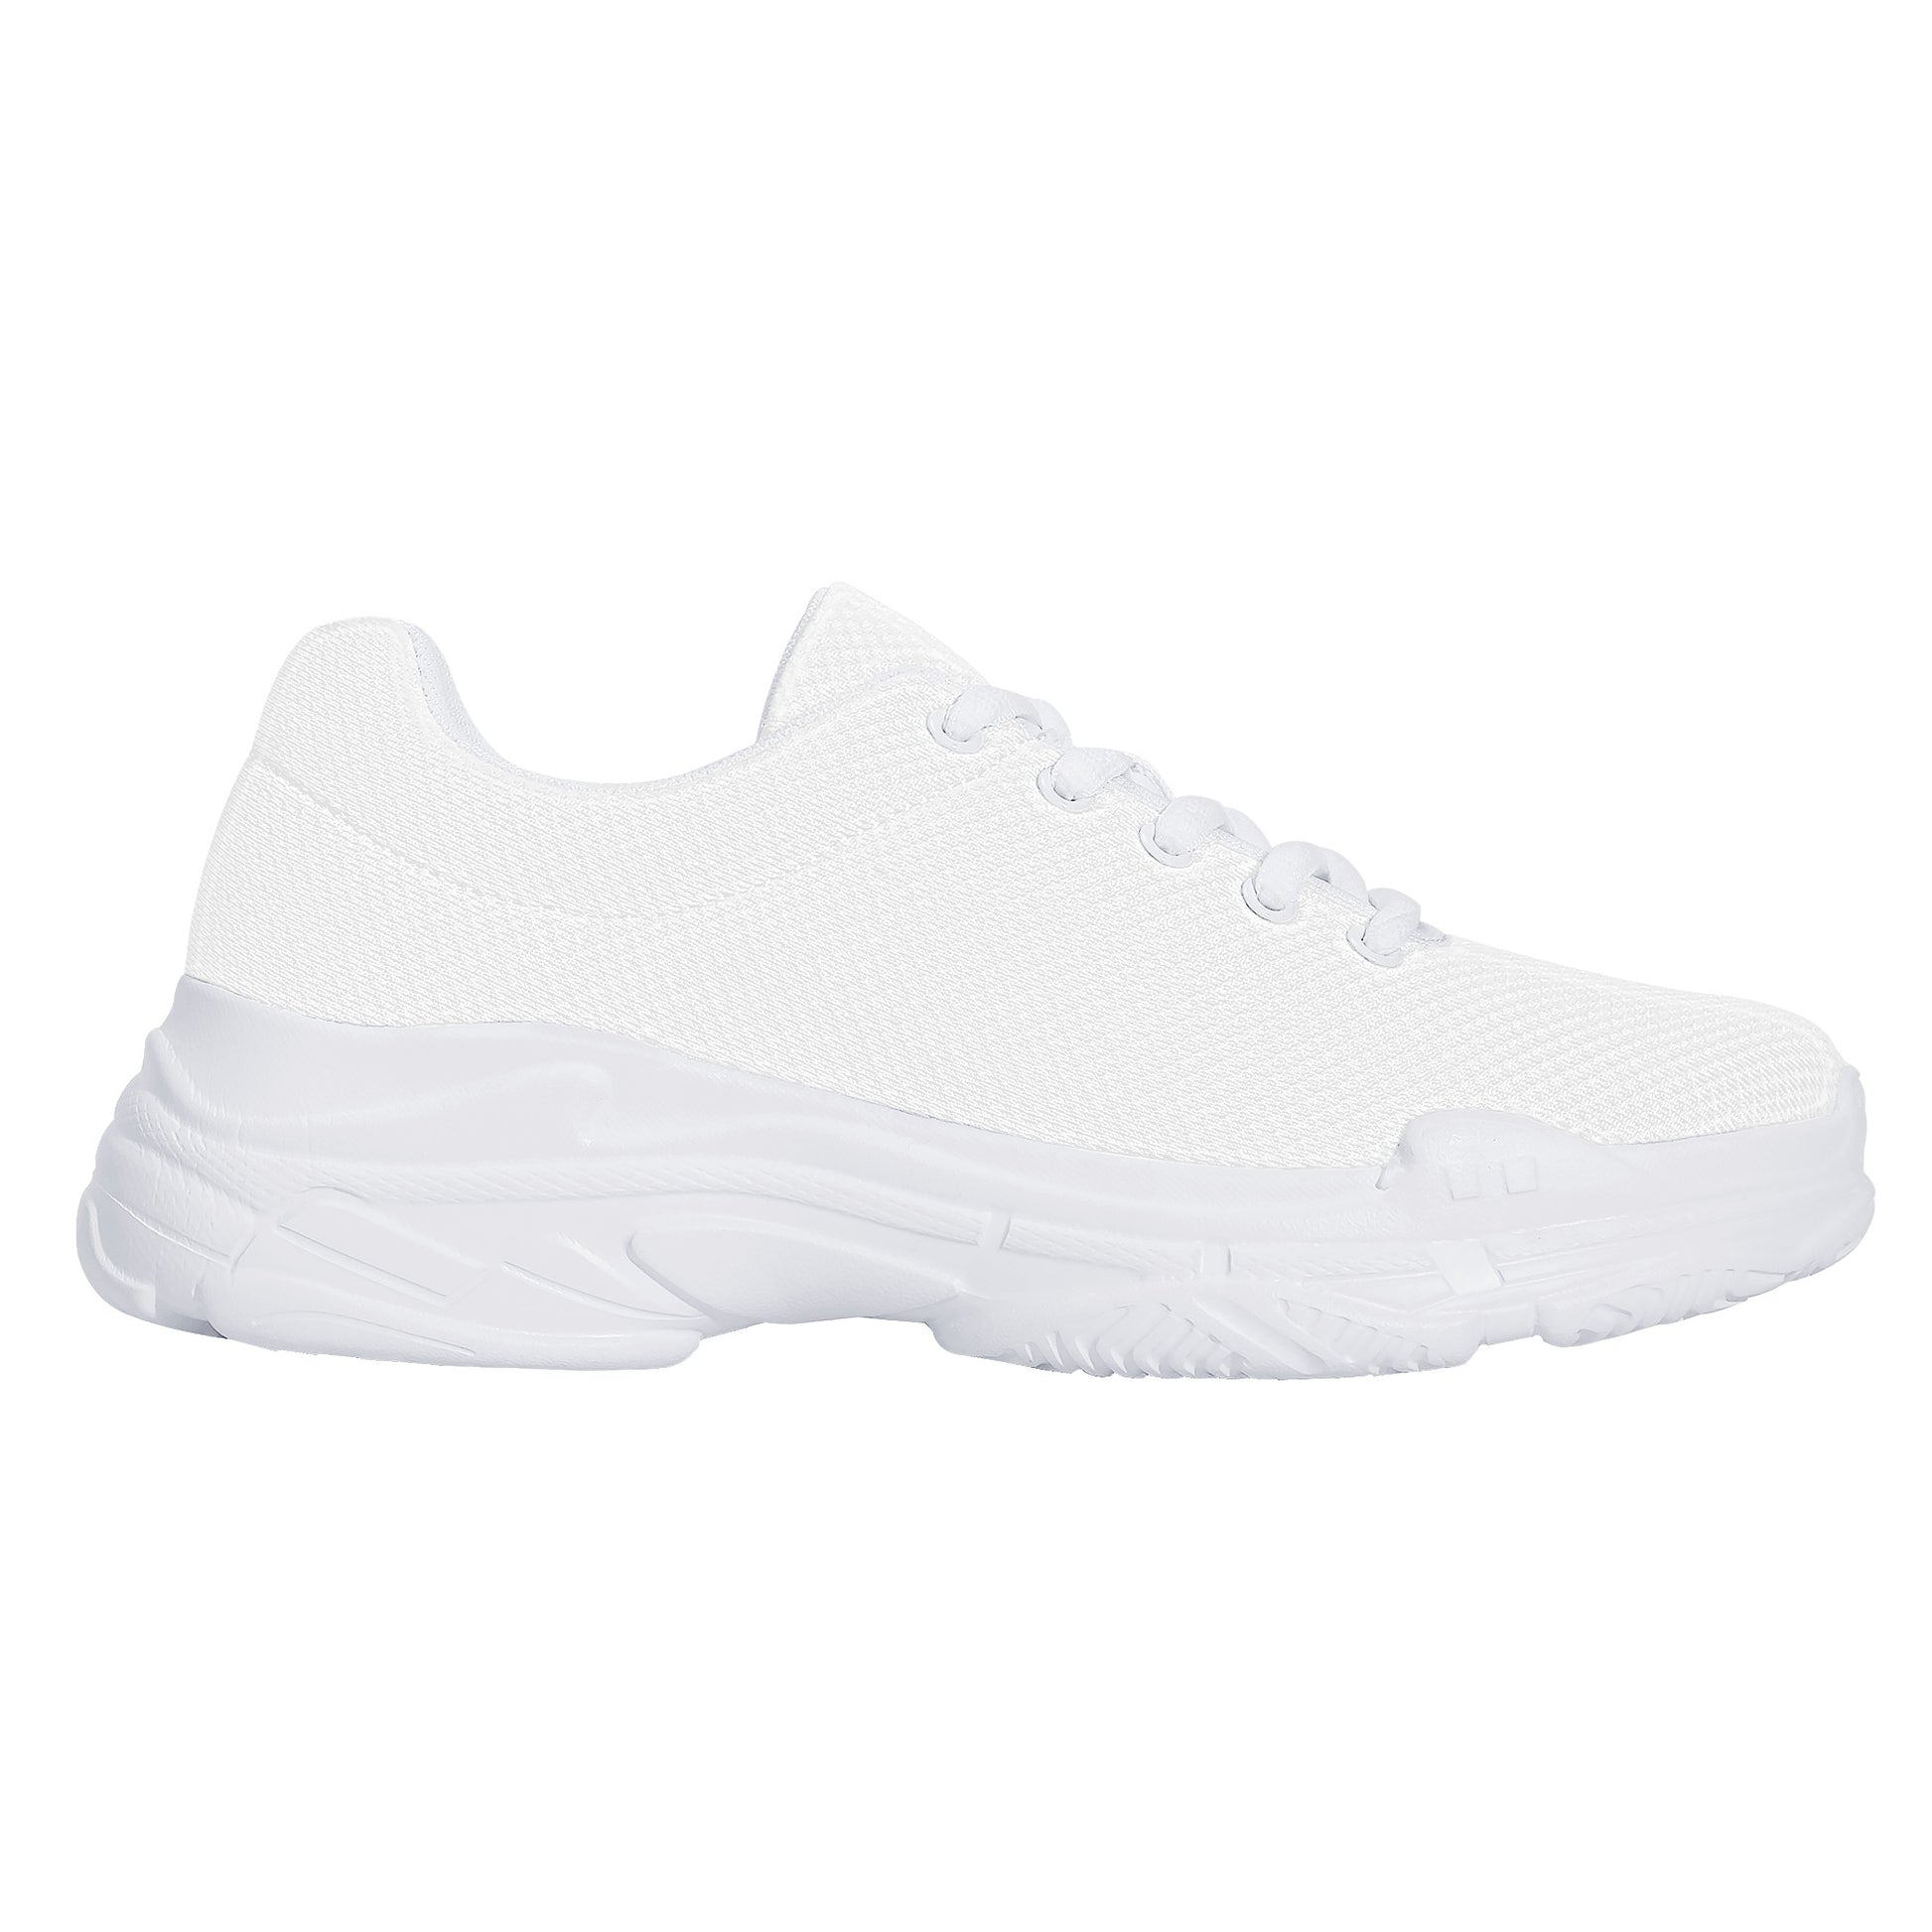 Create Your Own - Chunky Sneakers - White - HayGoodies